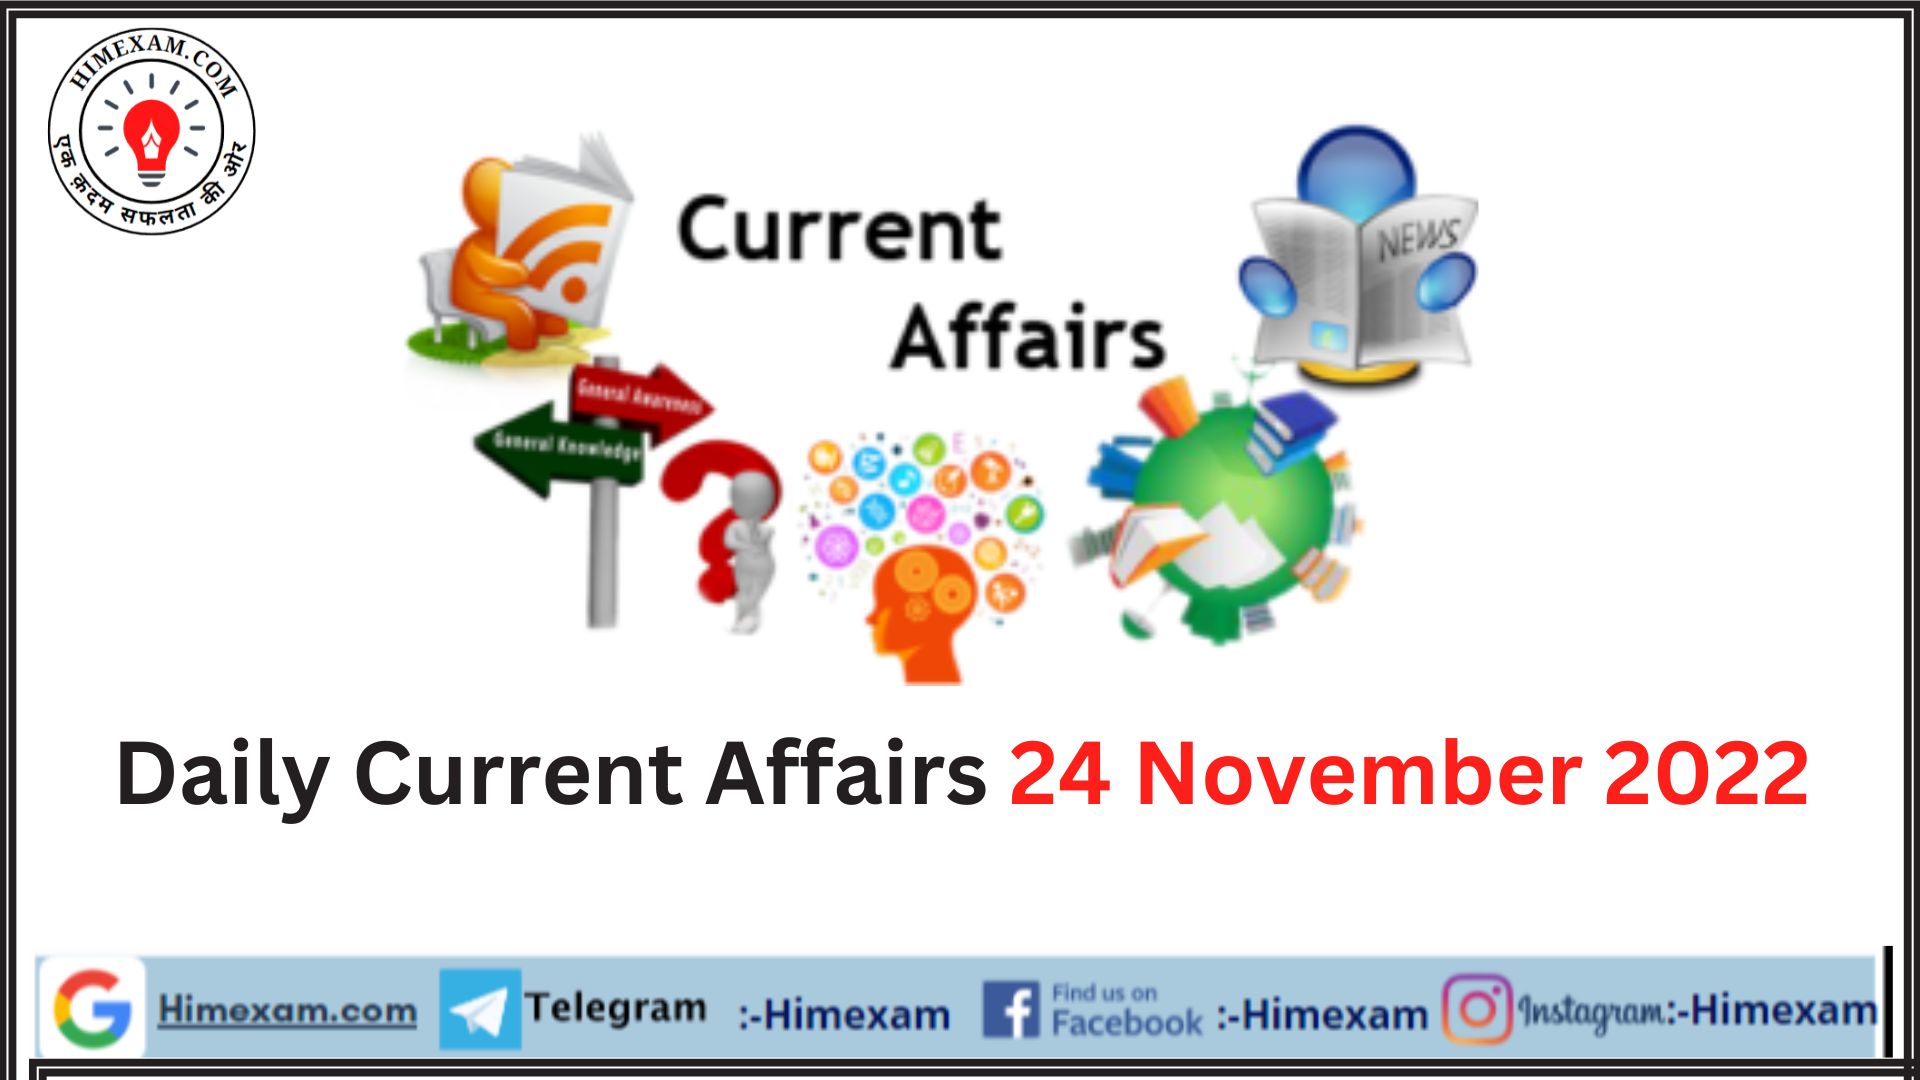 Daily Current Affairs 24 November 2022